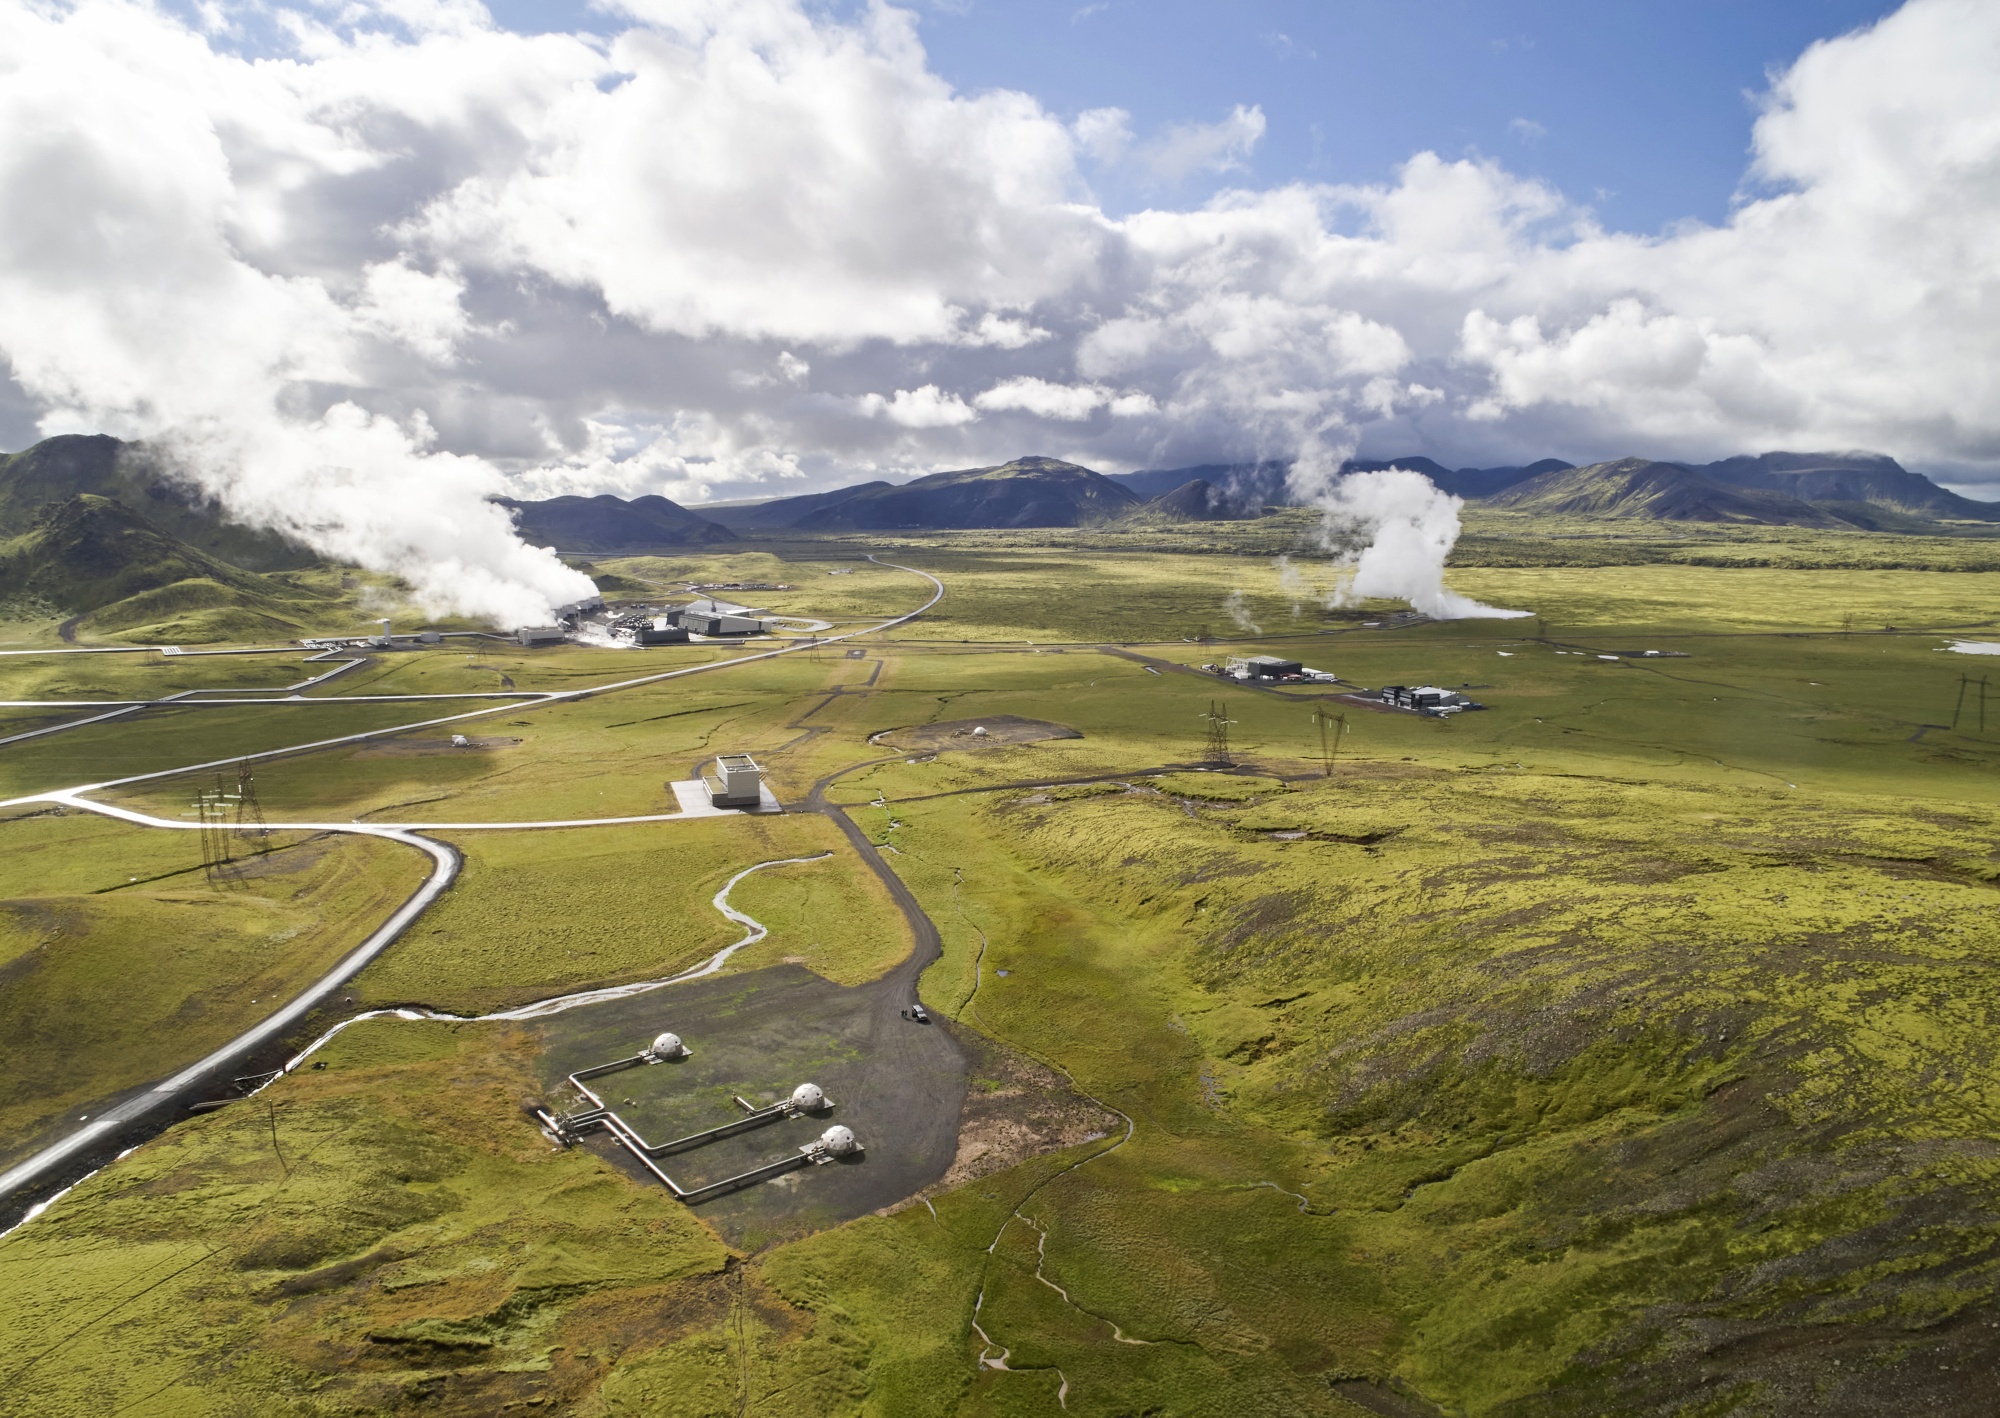 The world's largest direct-air capture facility, Orca, right, at the Hellisheidi geothermal power site, in Iceland.